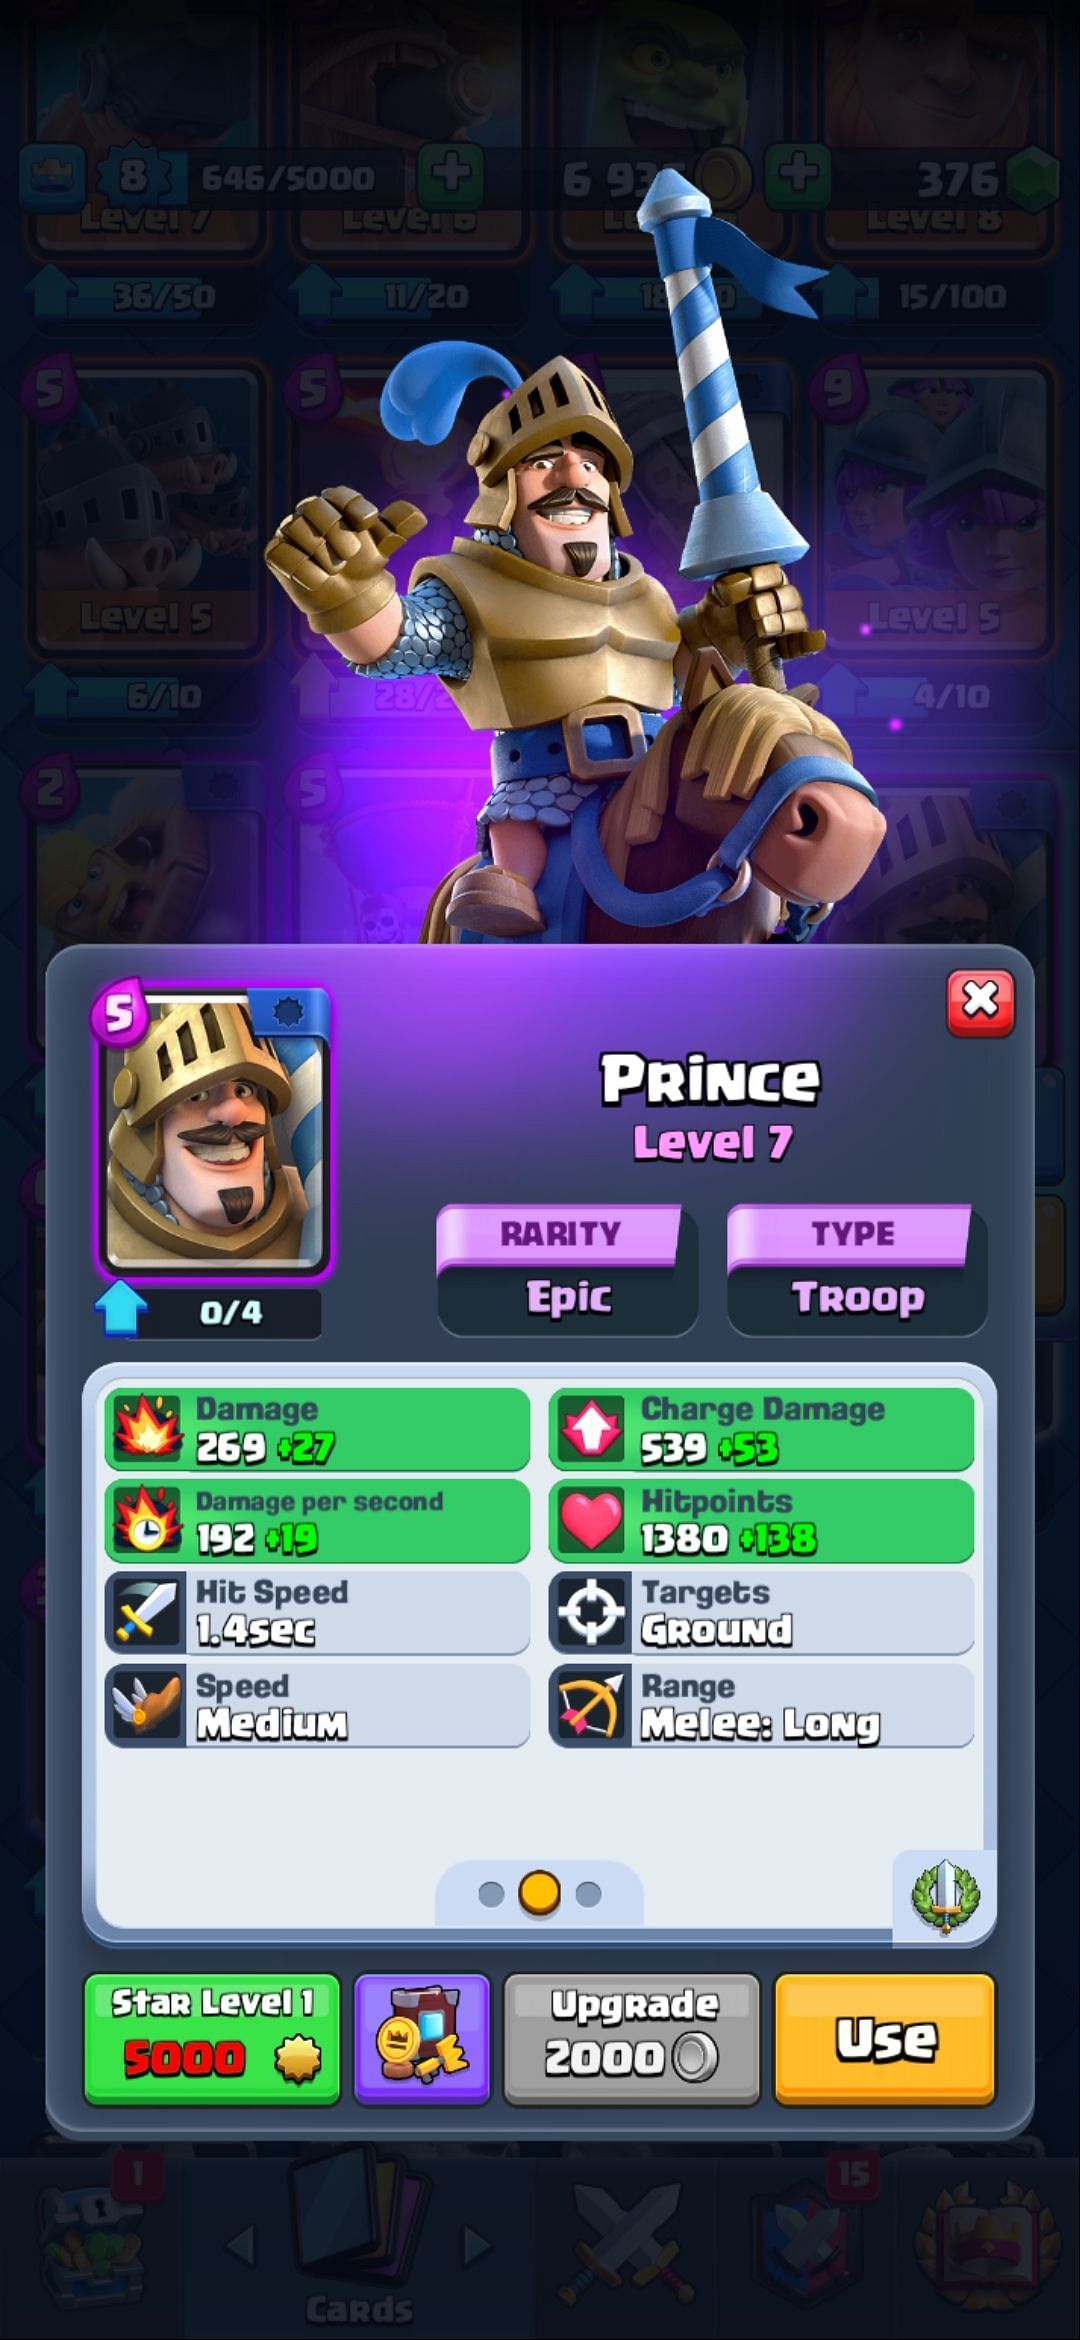 The Prince card (Image via Clash of Clans)